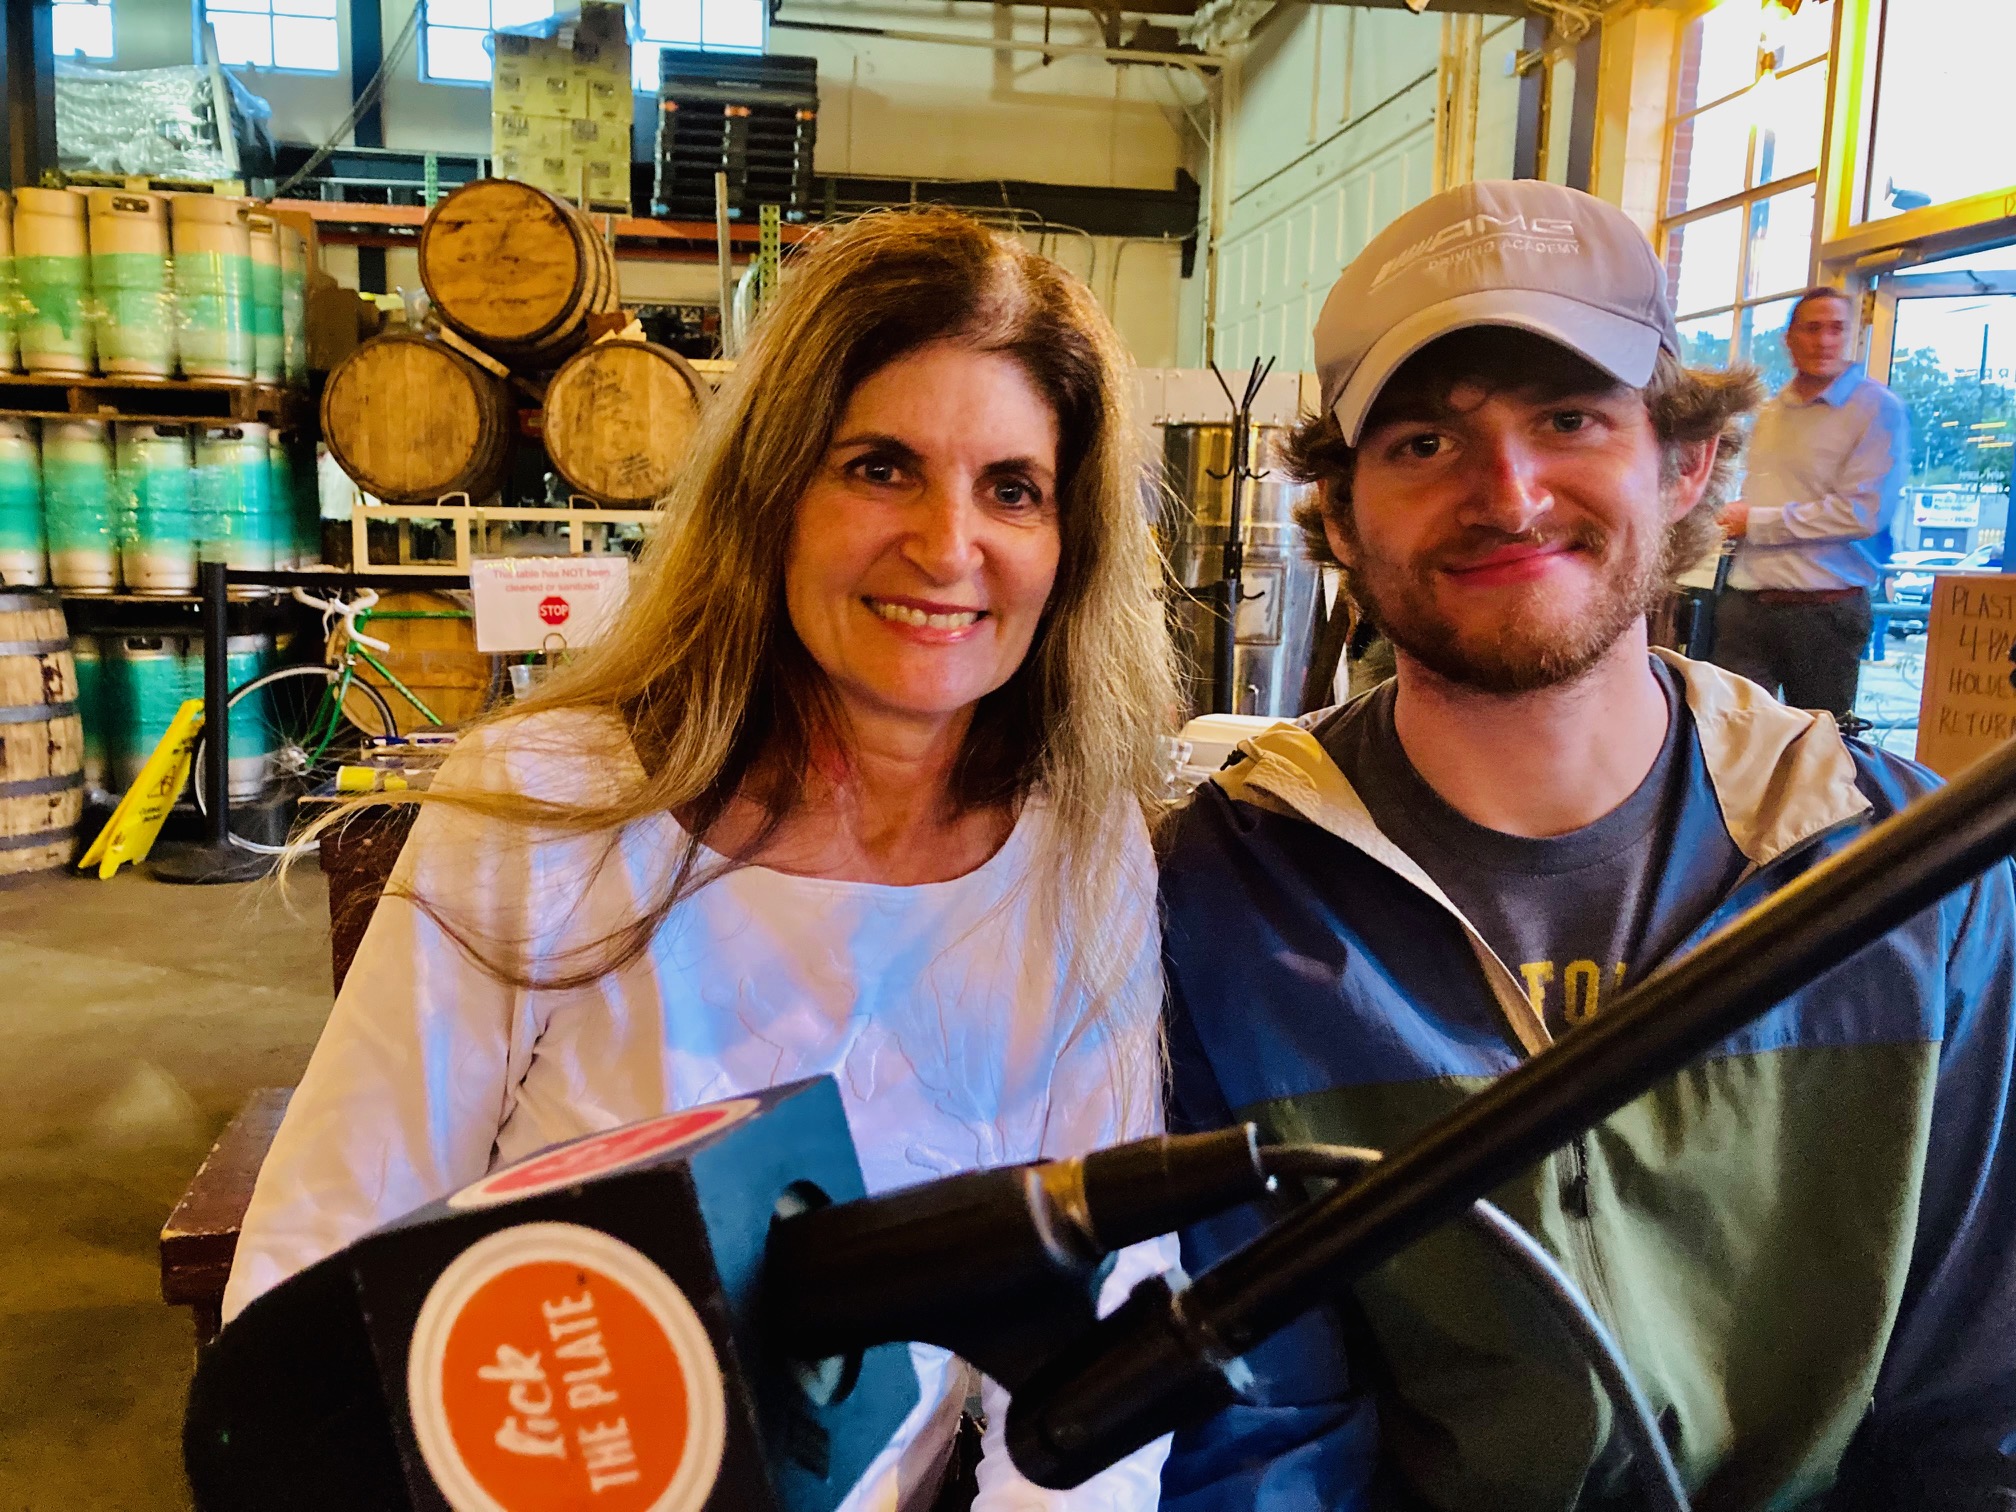 Hear Great Lakes Pot Pies’ story on Lick The Plate